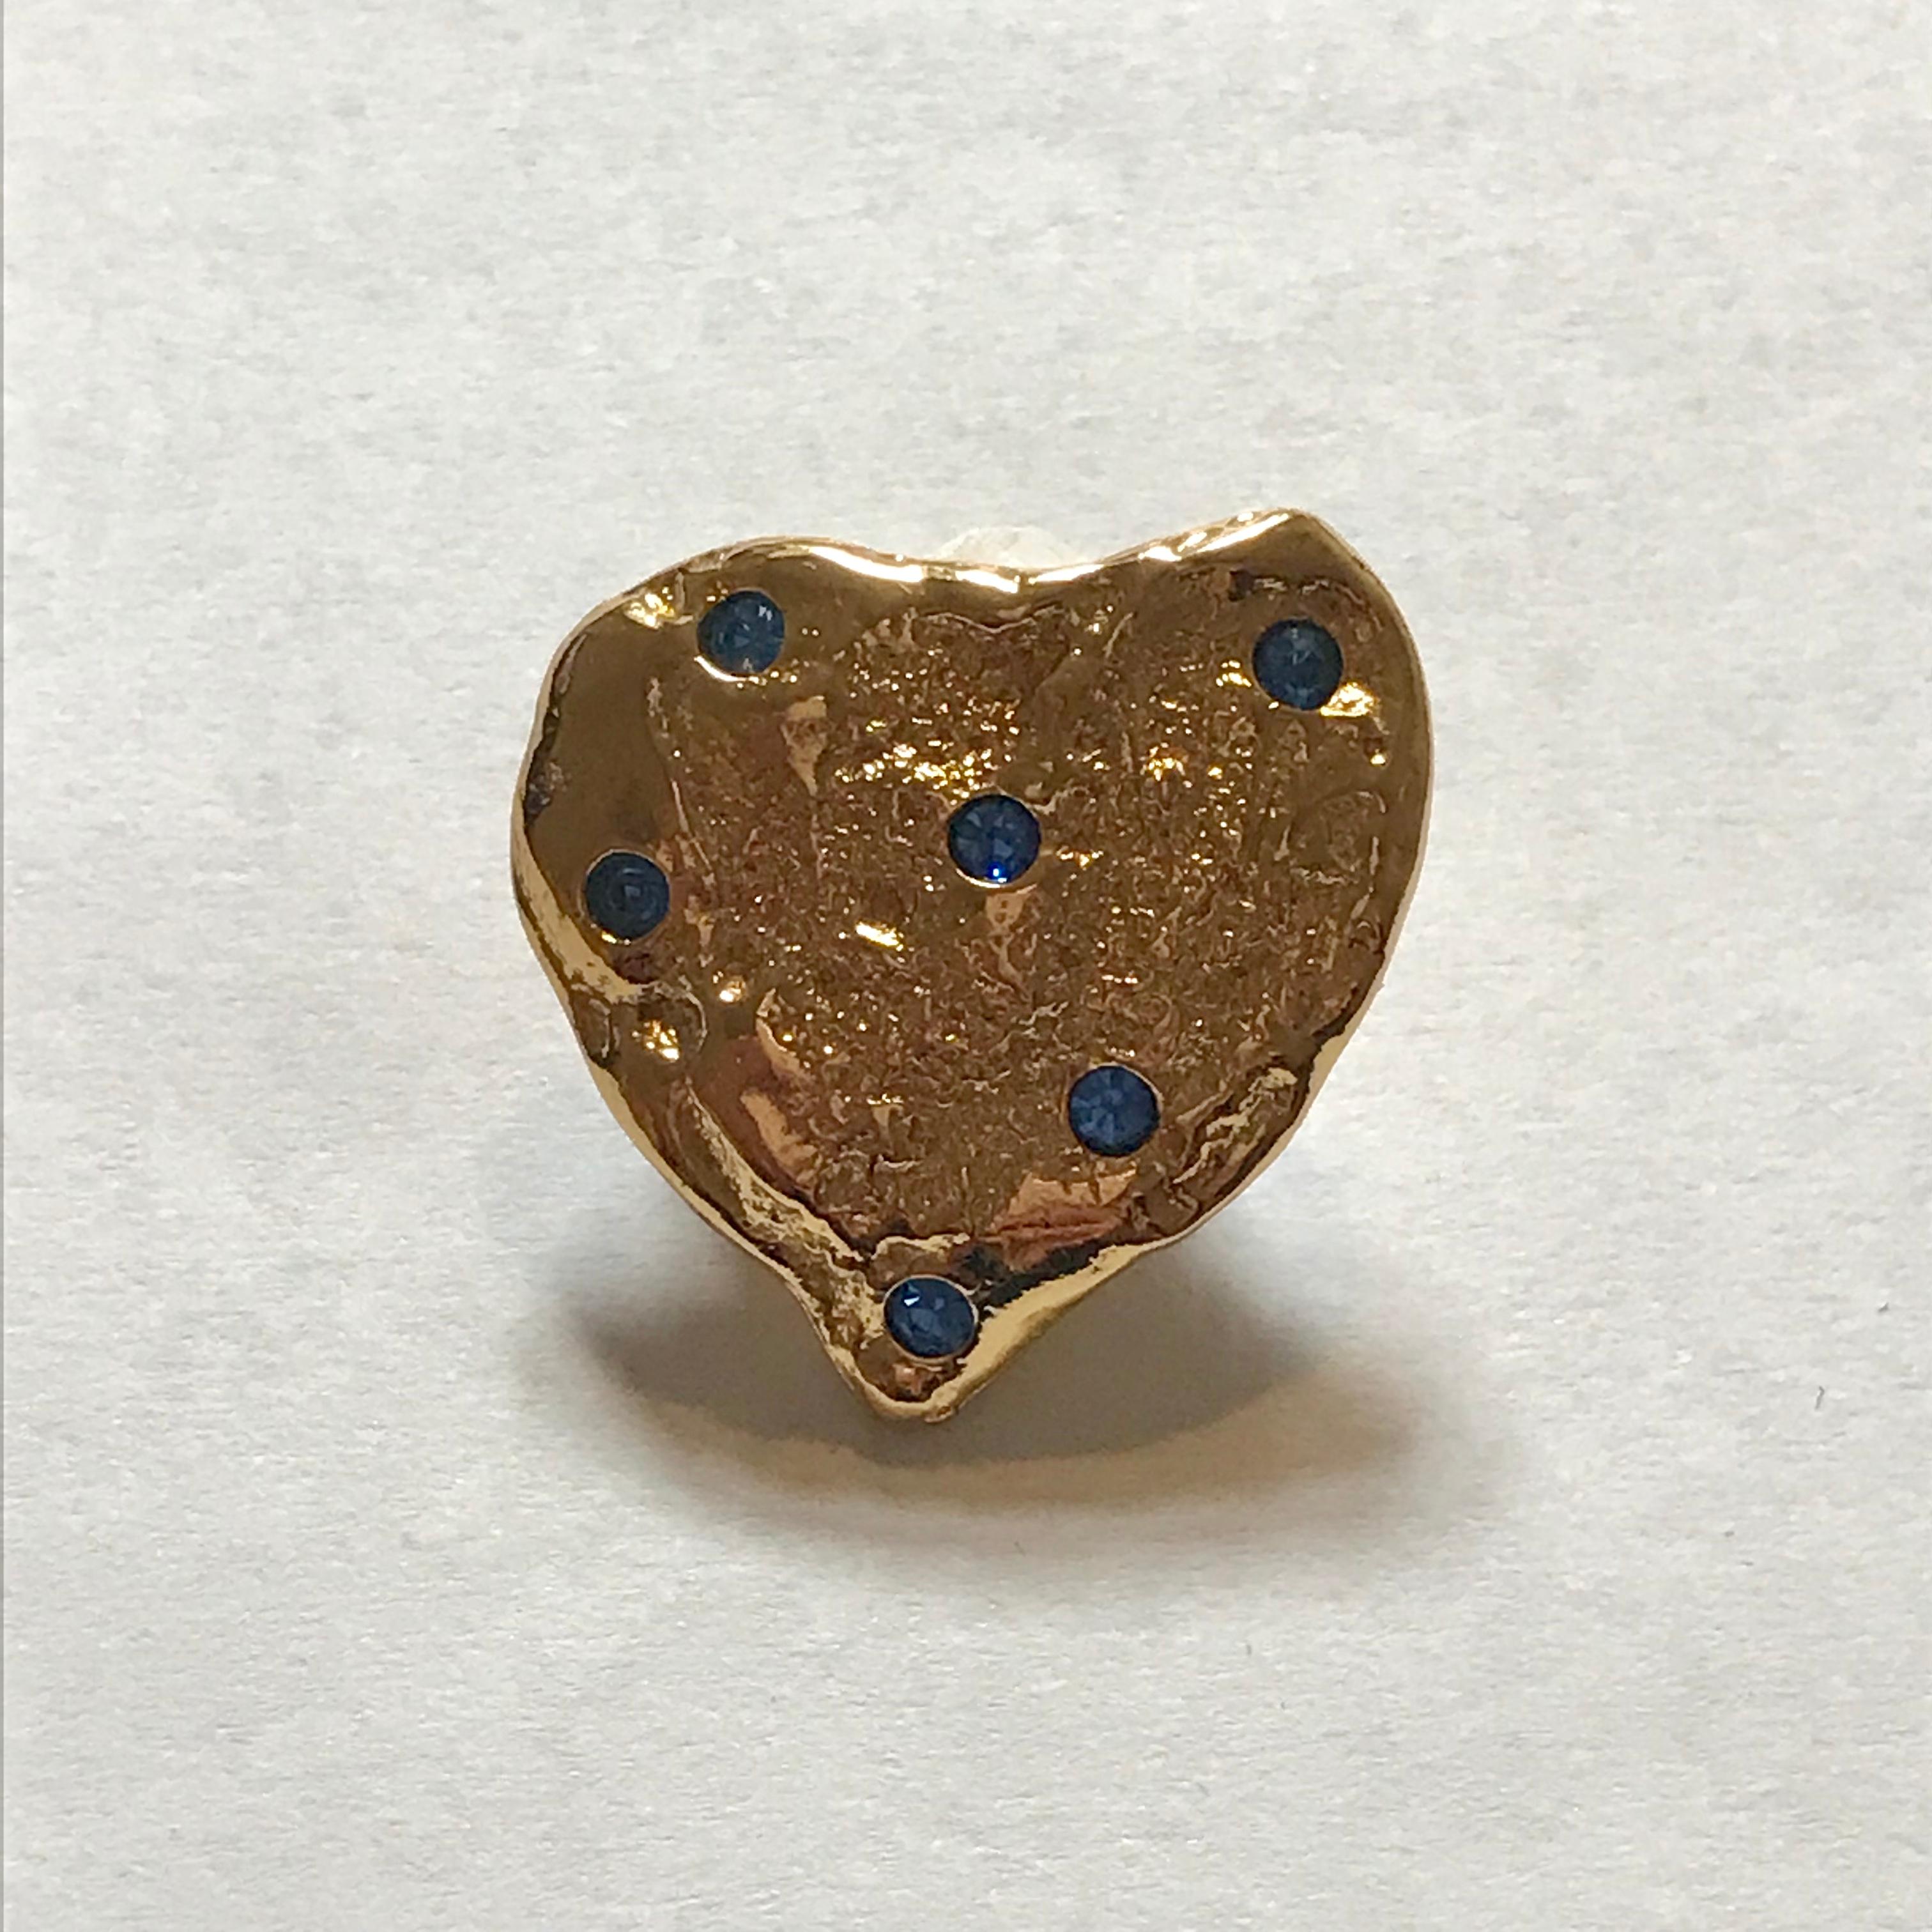 Yves Saint Laurent small textured gold tone brooch in an abstract heart shape, accented with small blue crystals throughout. A truly iconic piece, as the heart motif  was a recurring symbol throughout the designs of Saint Laurent for his whole